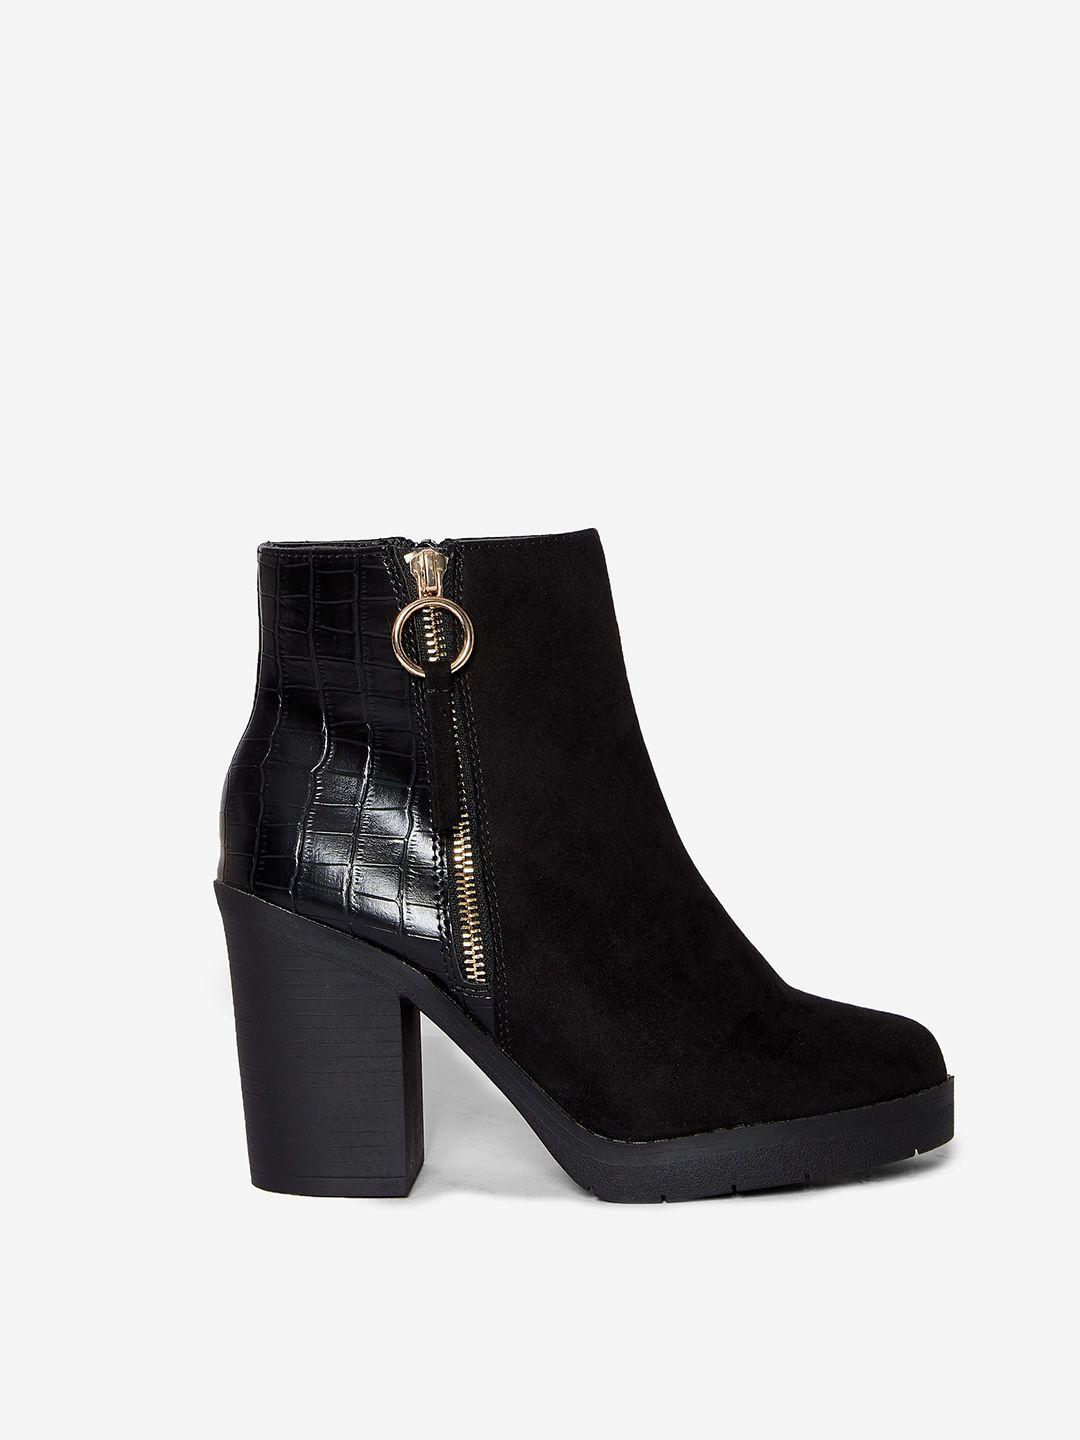 dorothy-perkins-women-black-solid-mid-top-wide-heeled-boots-with-croc-textured-detail